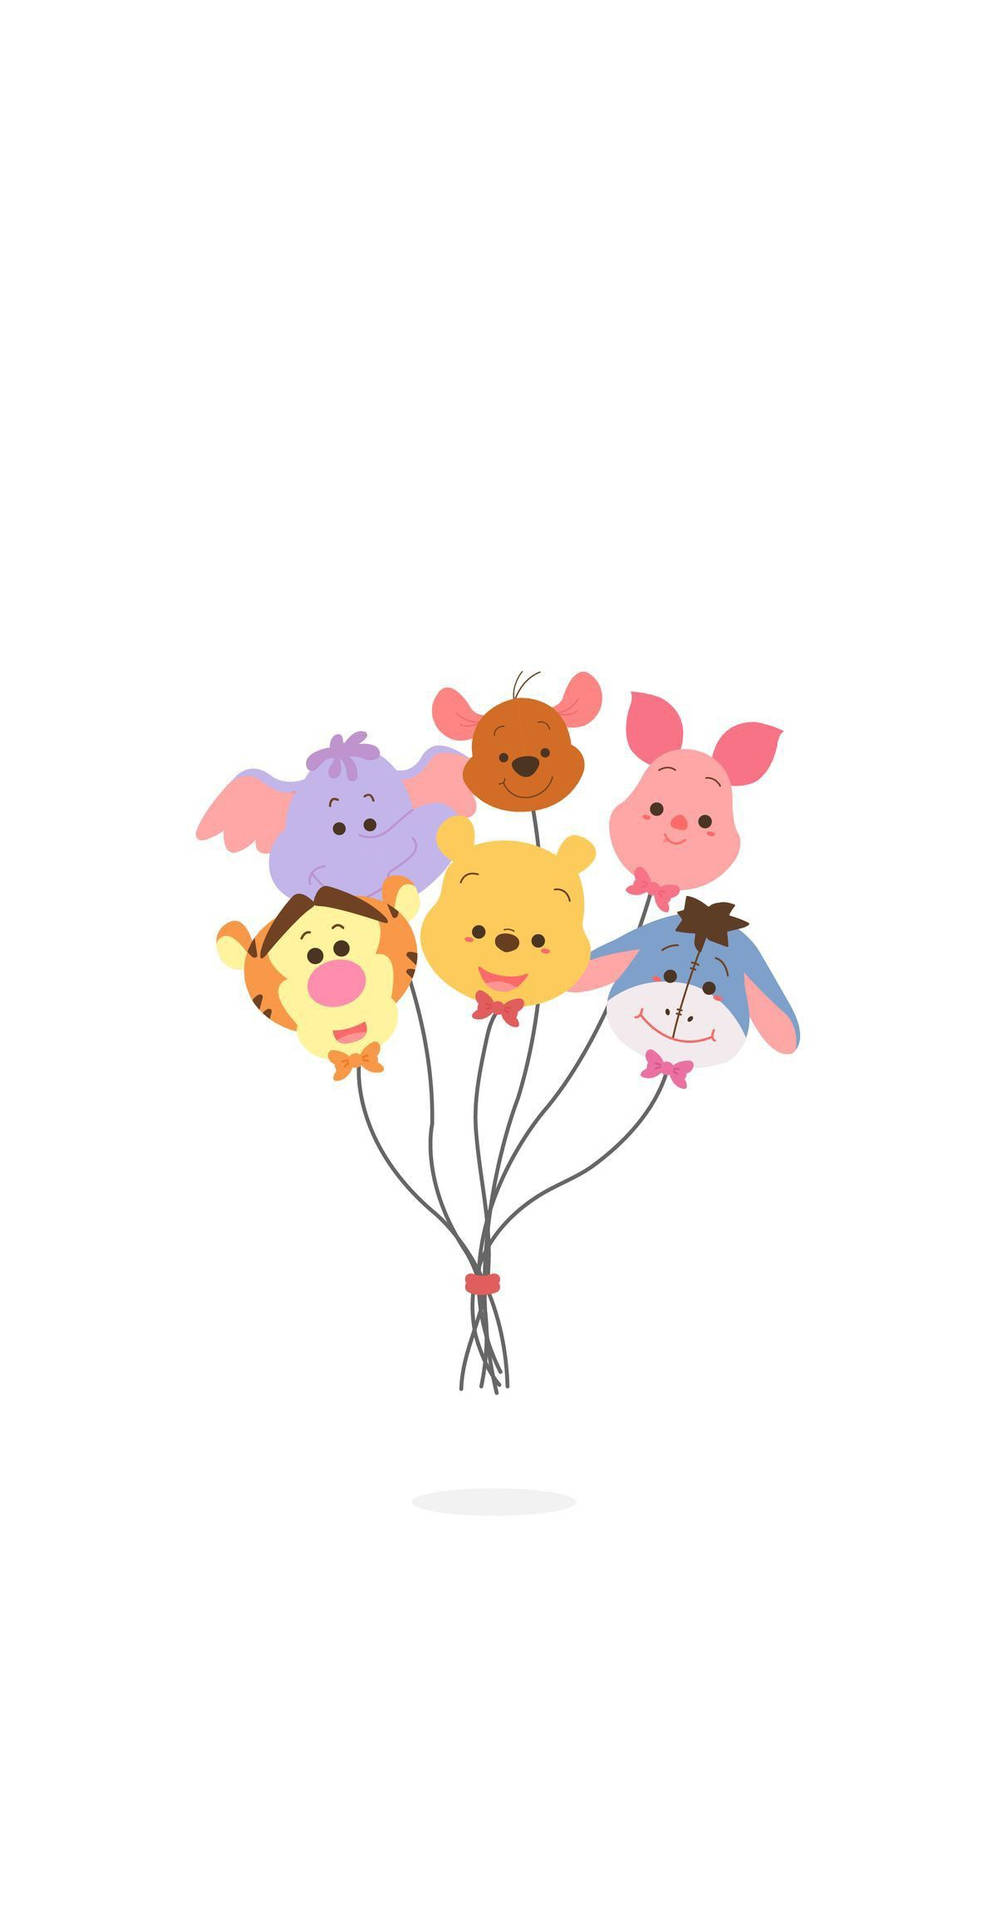 Winnie The Pooh As Balloons Background